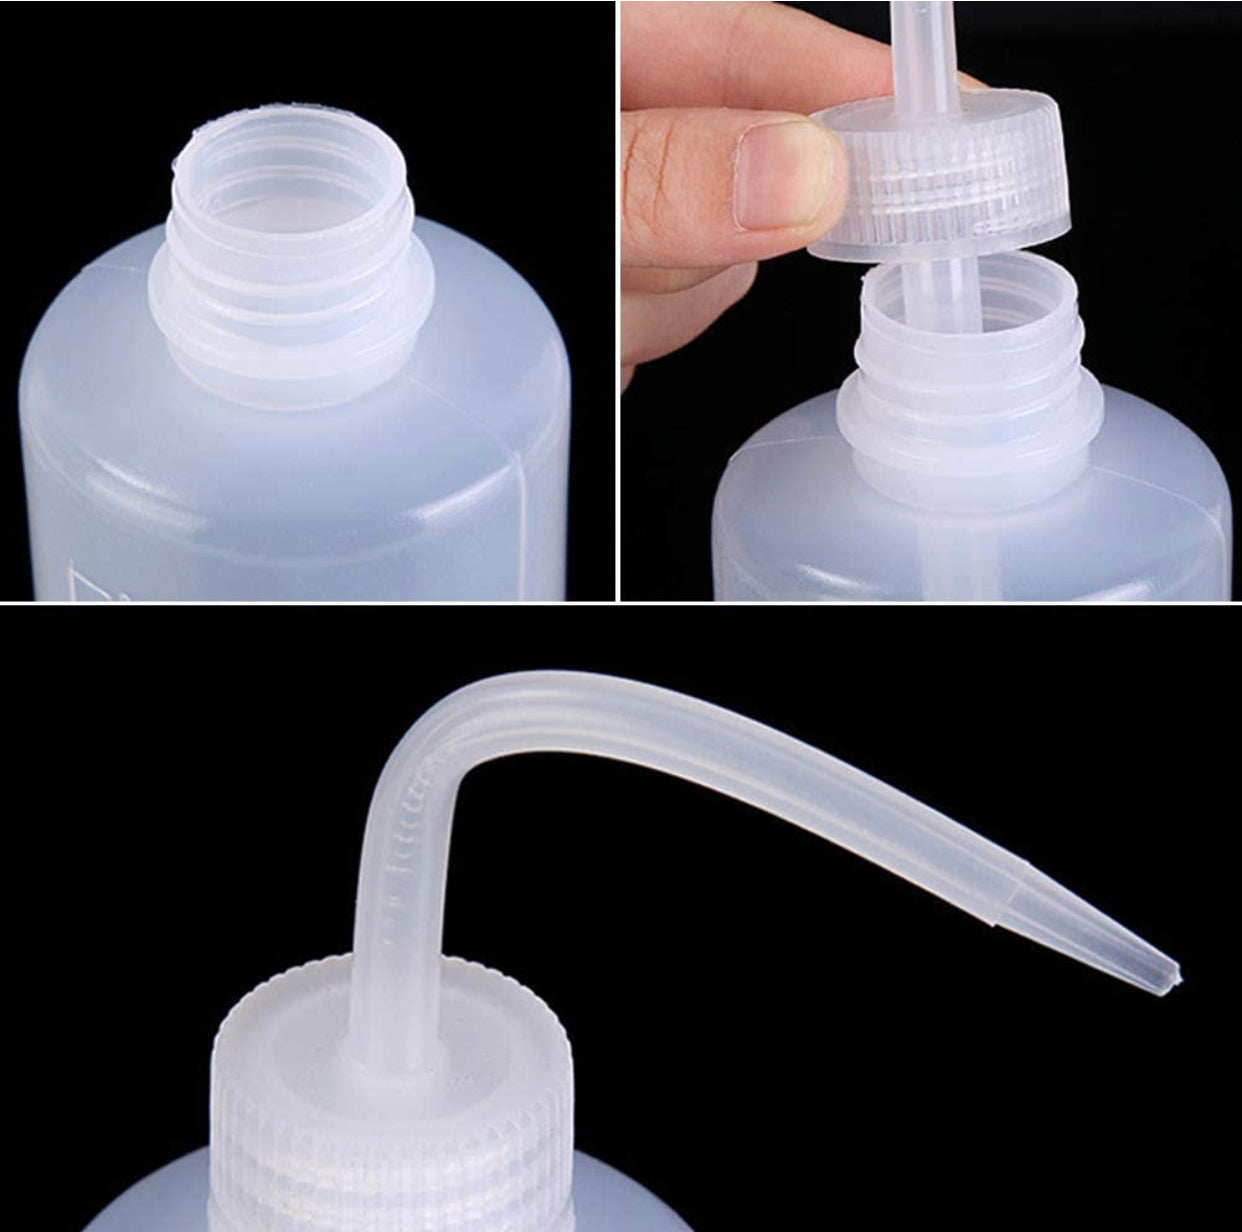 MycoPunks - Safety Wash Squeeze Bottle 500ml used for Isopropyl - Lab Consumables